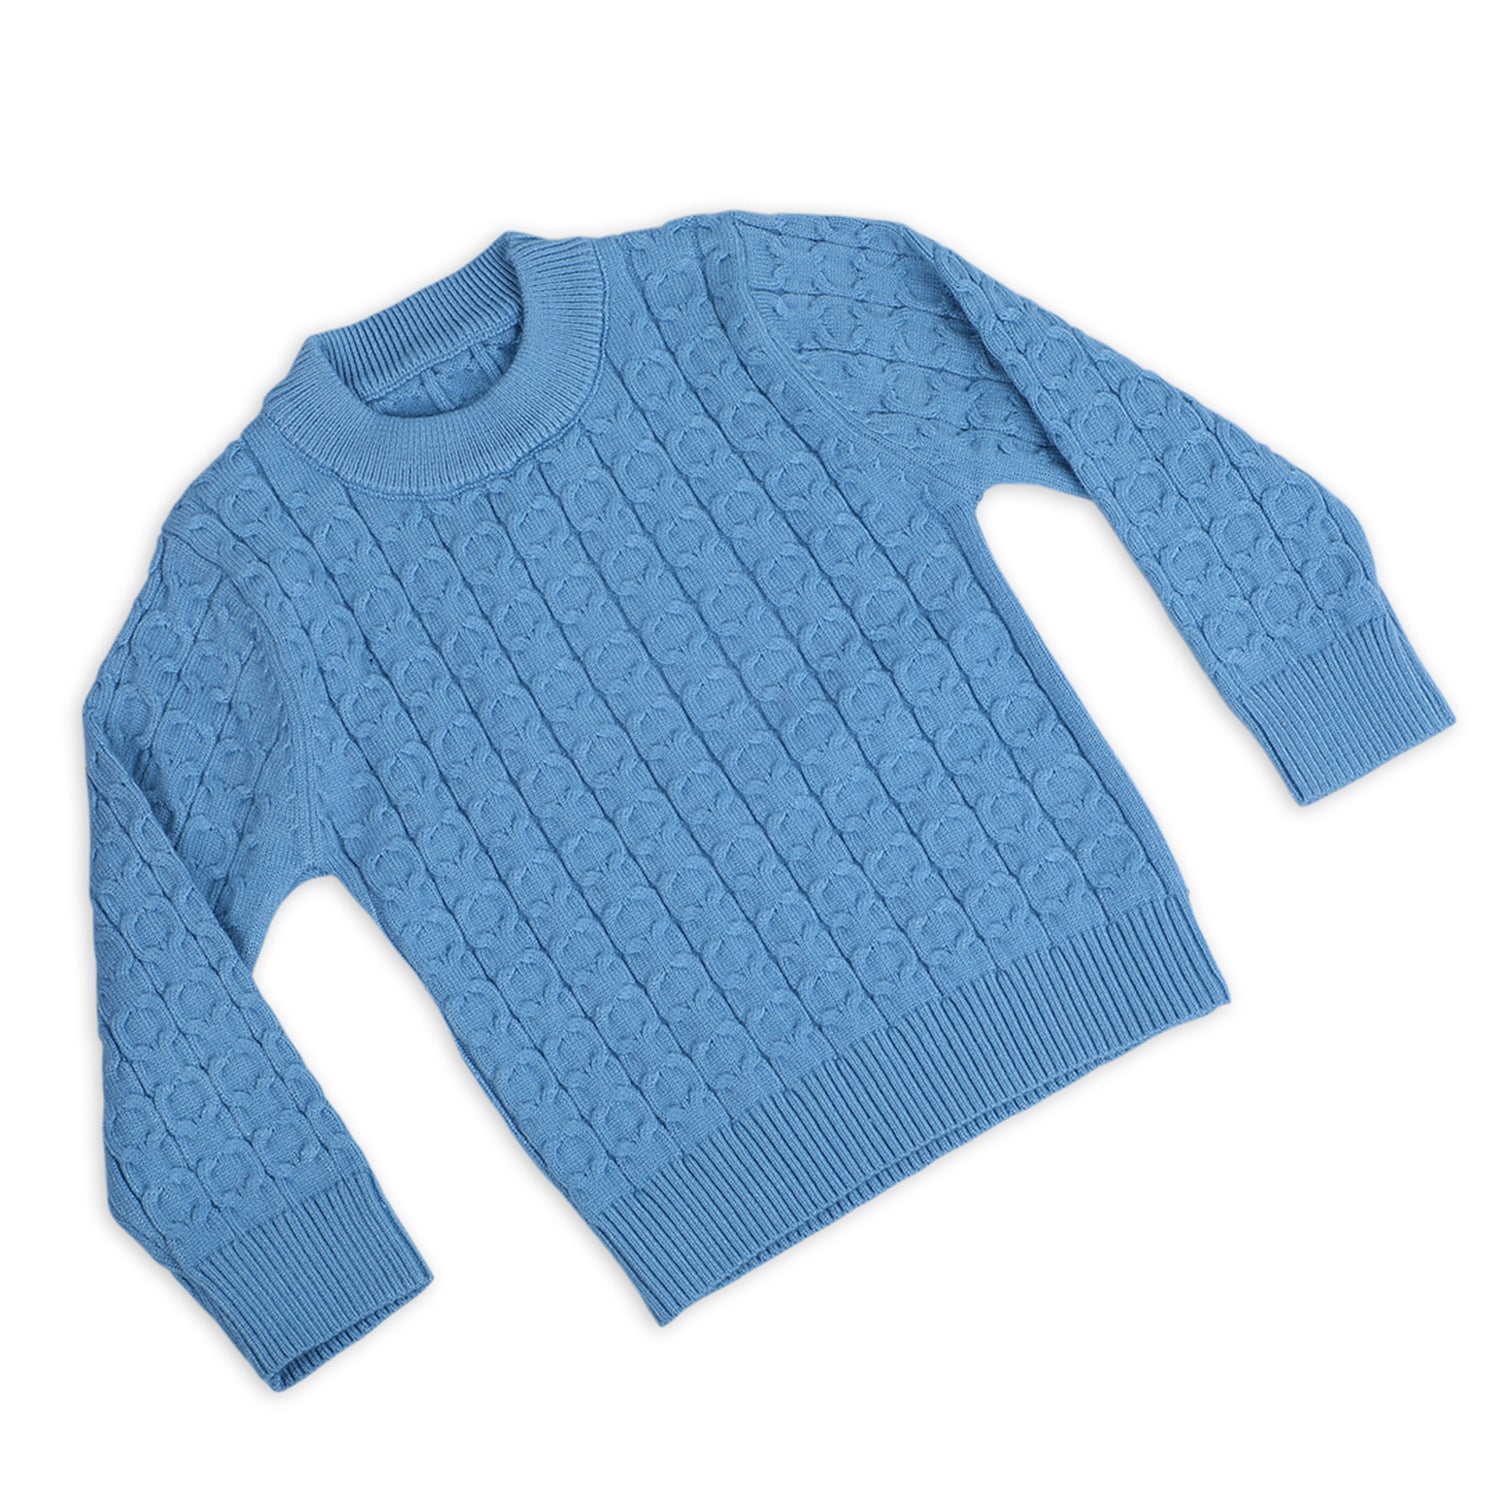 Classic Solid Round Neck Premium Full Sleeves Cable Knit Sweater - Blue